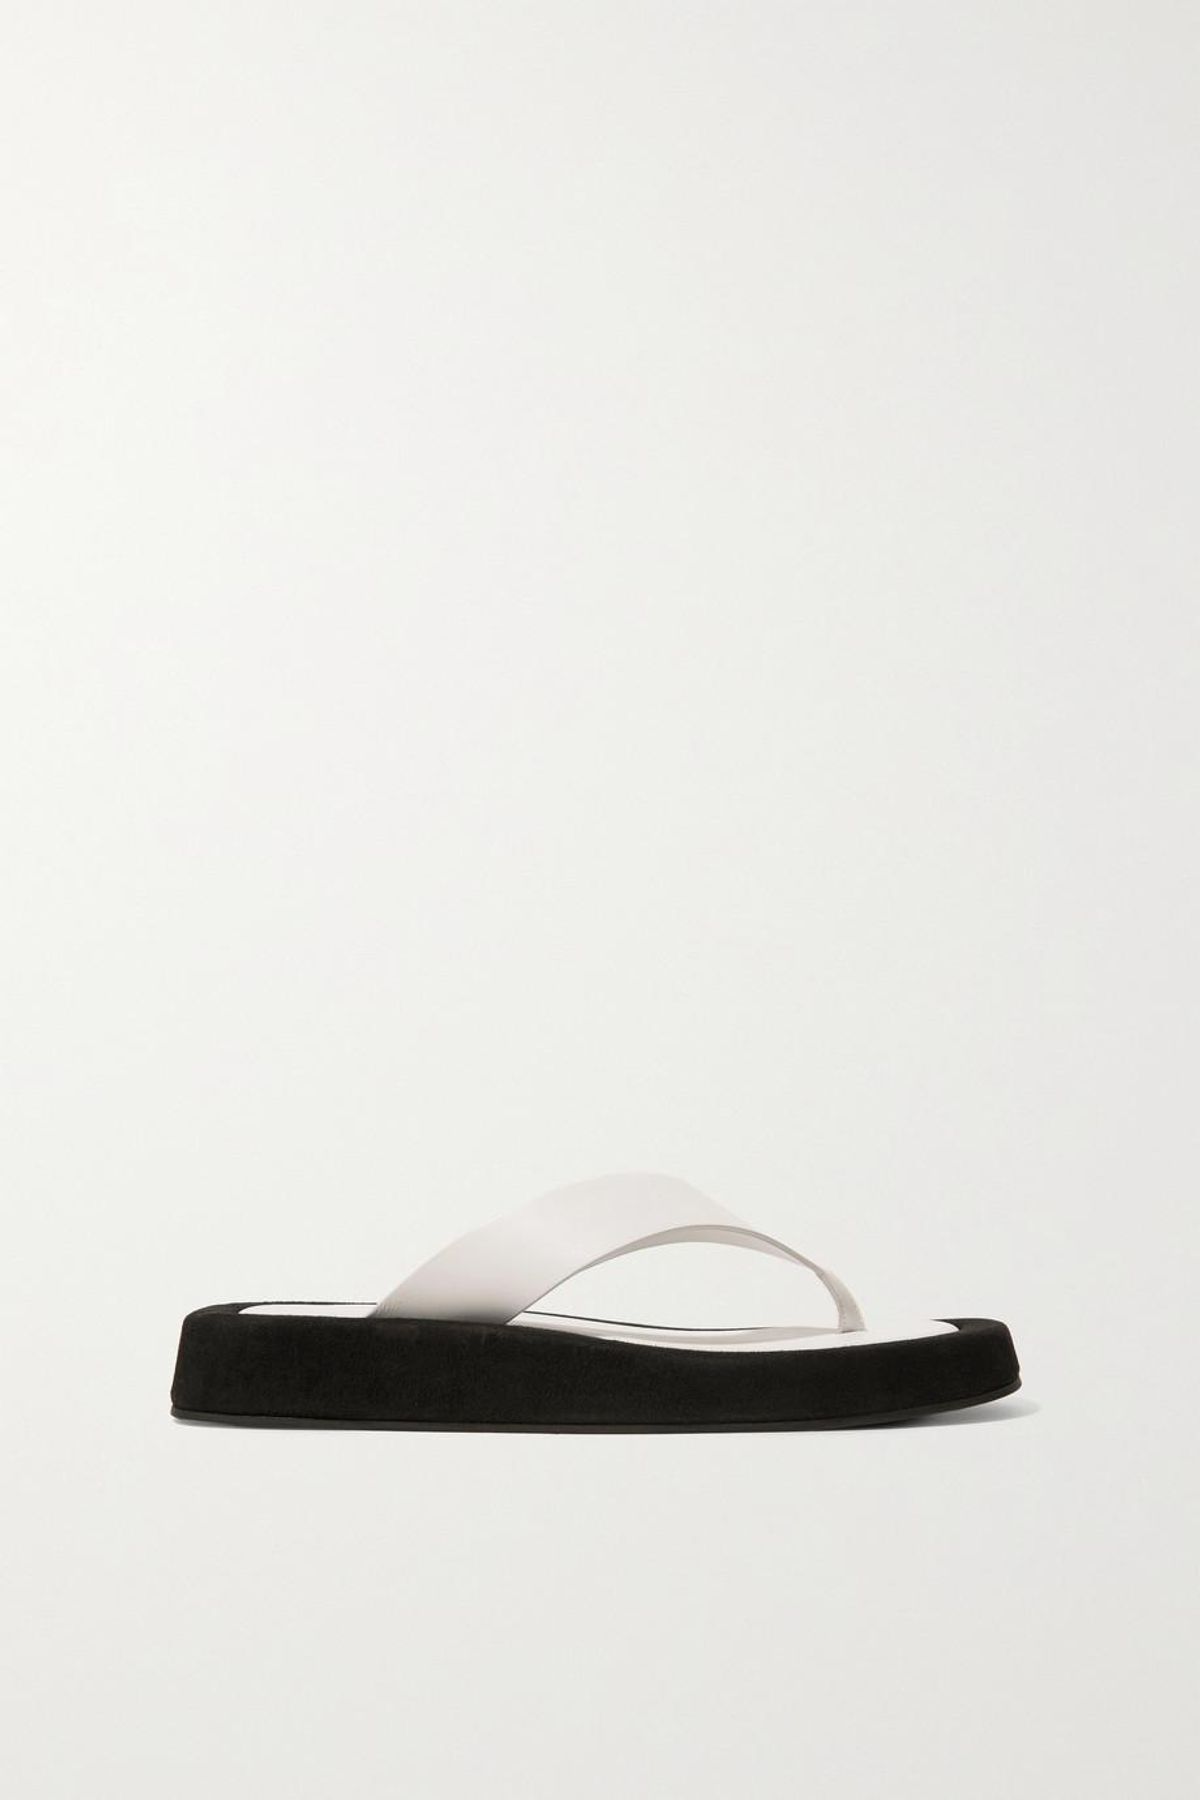 Ginza Two-tone Leather and Suede Platform Flip Flops